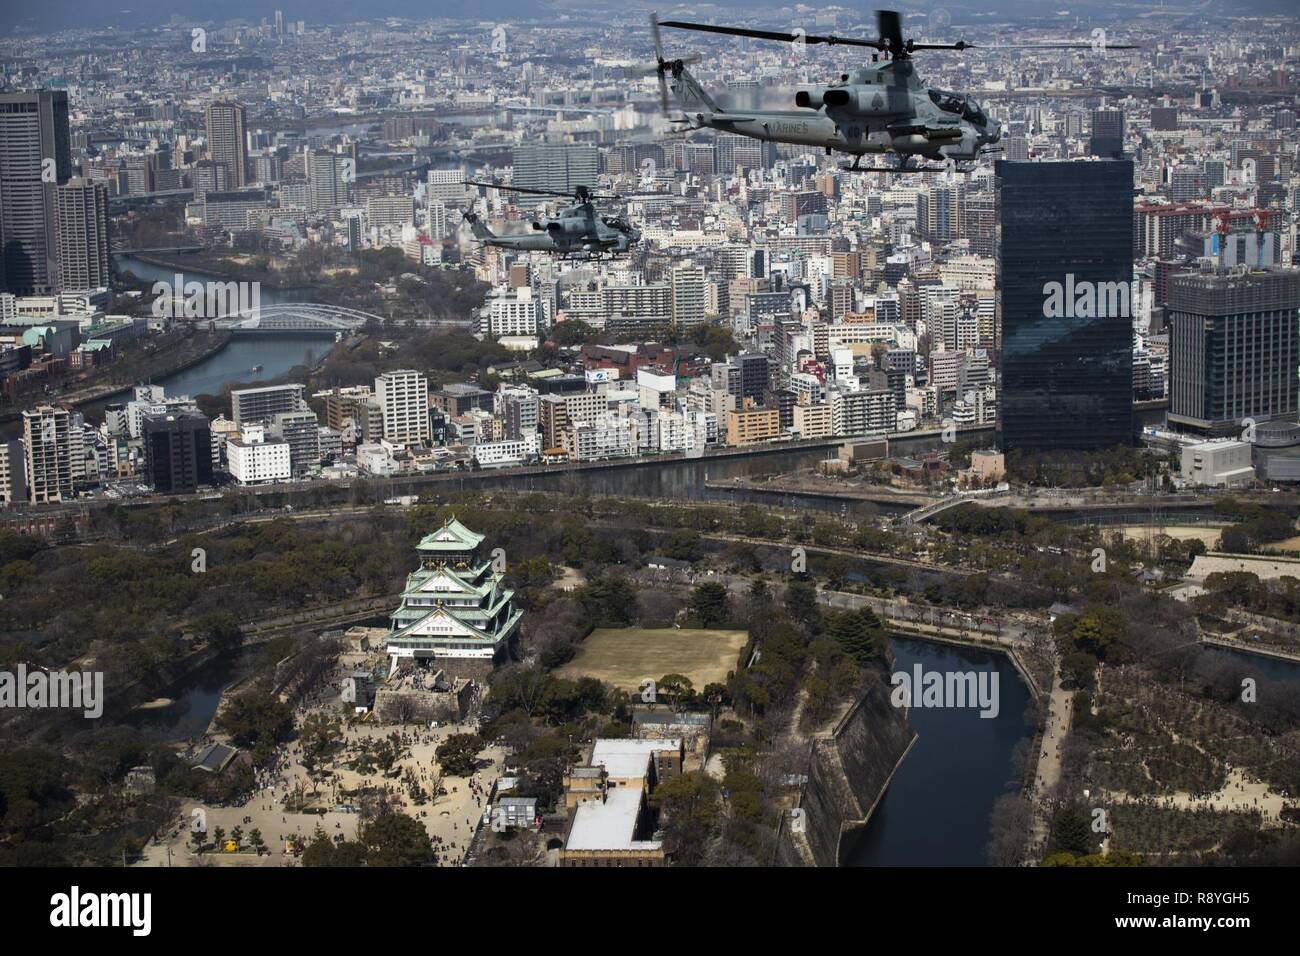 AH-1Z Vipers soar through the skies over Osaka Castle, Osaka, Japan, March 12, 2017. Marine Light Attack Helicopter Squadron 267 validated the long-range capability of the auxiliary fuel tanks on their H-1 platform helicopters by flying 314 nautical miles during one leg of the journey, March 10. These aircrafts’ extended range is crucial to maintaining a stronger, more capable forward-deployed force in the Asia-Indo-Pacific region. The Marines in the aircraft are with HMLA-267, currently assigned to Marine Aircraft Group 36, 1st Marine Aircraft Wing, III Marine Expeditionary Force through the  Stock Photo